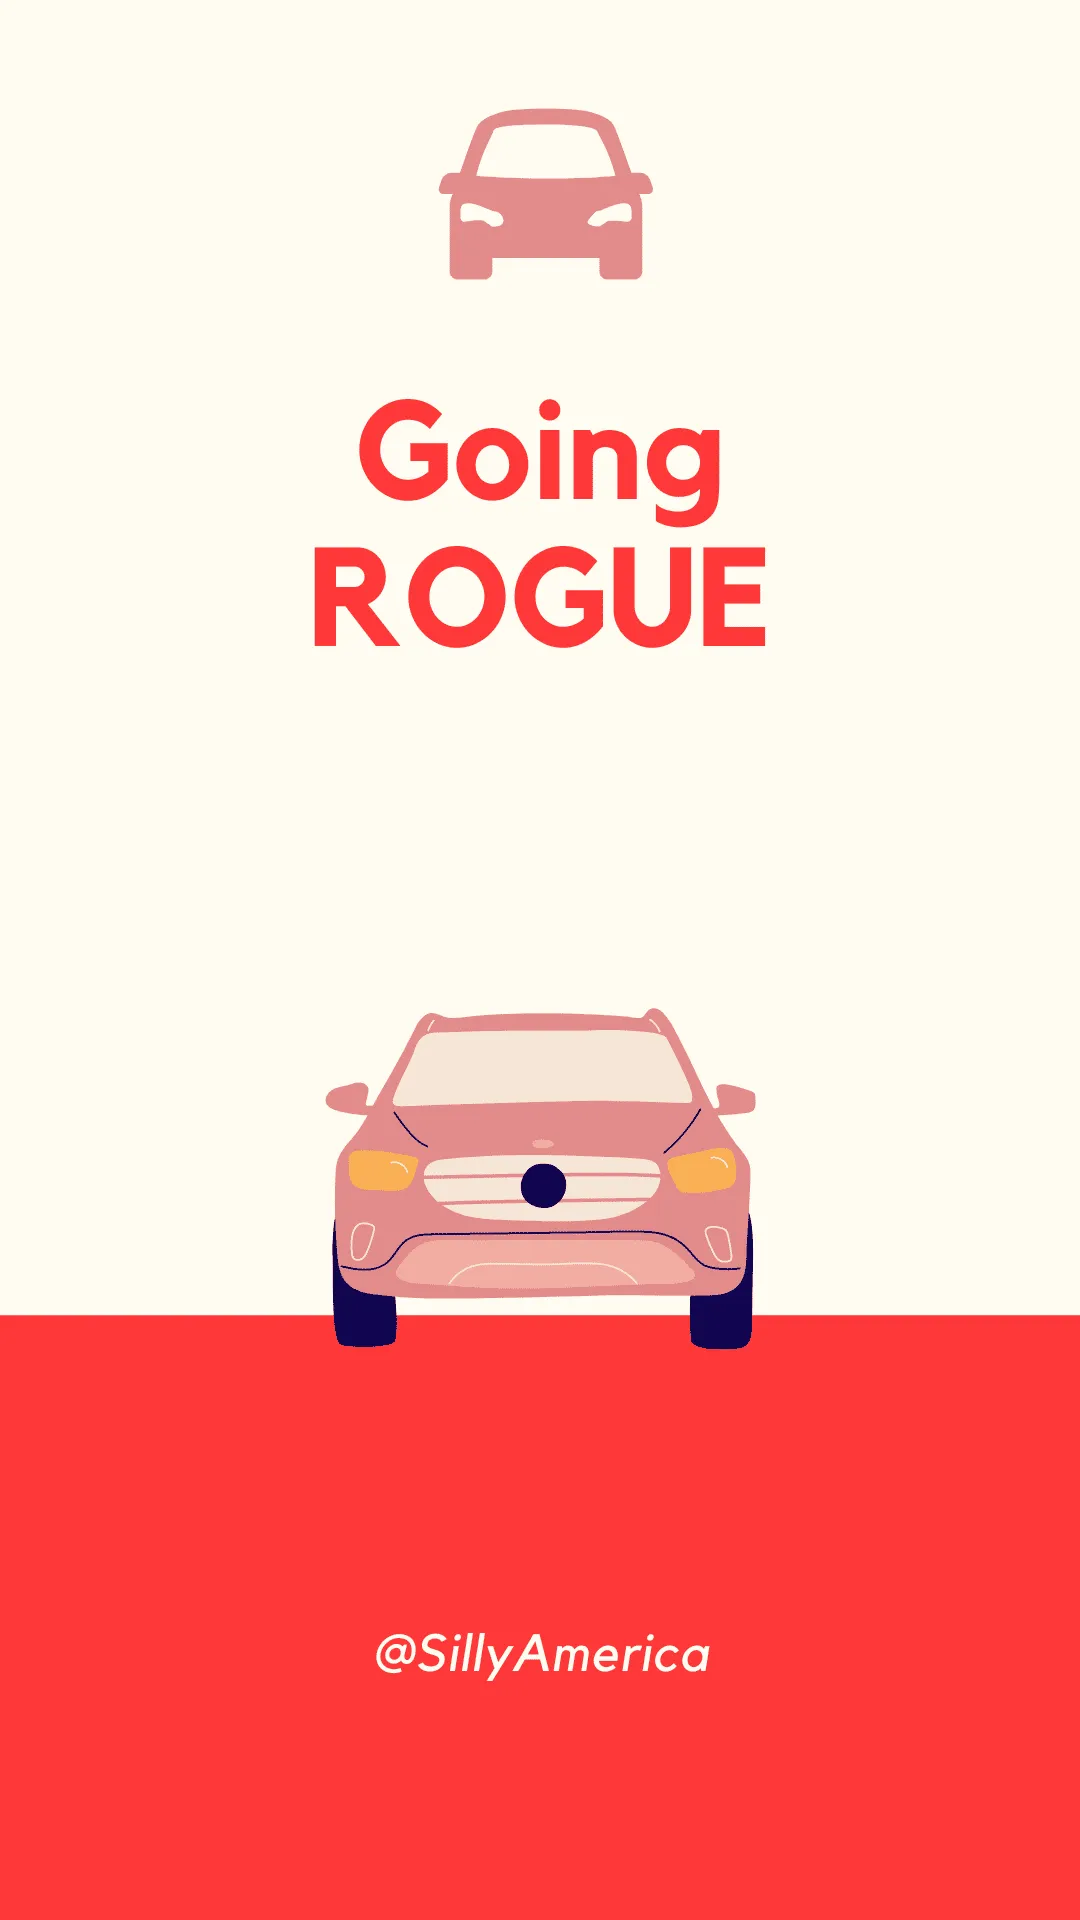 Going ROGUE. - Car Puns to fuel your road trip content!